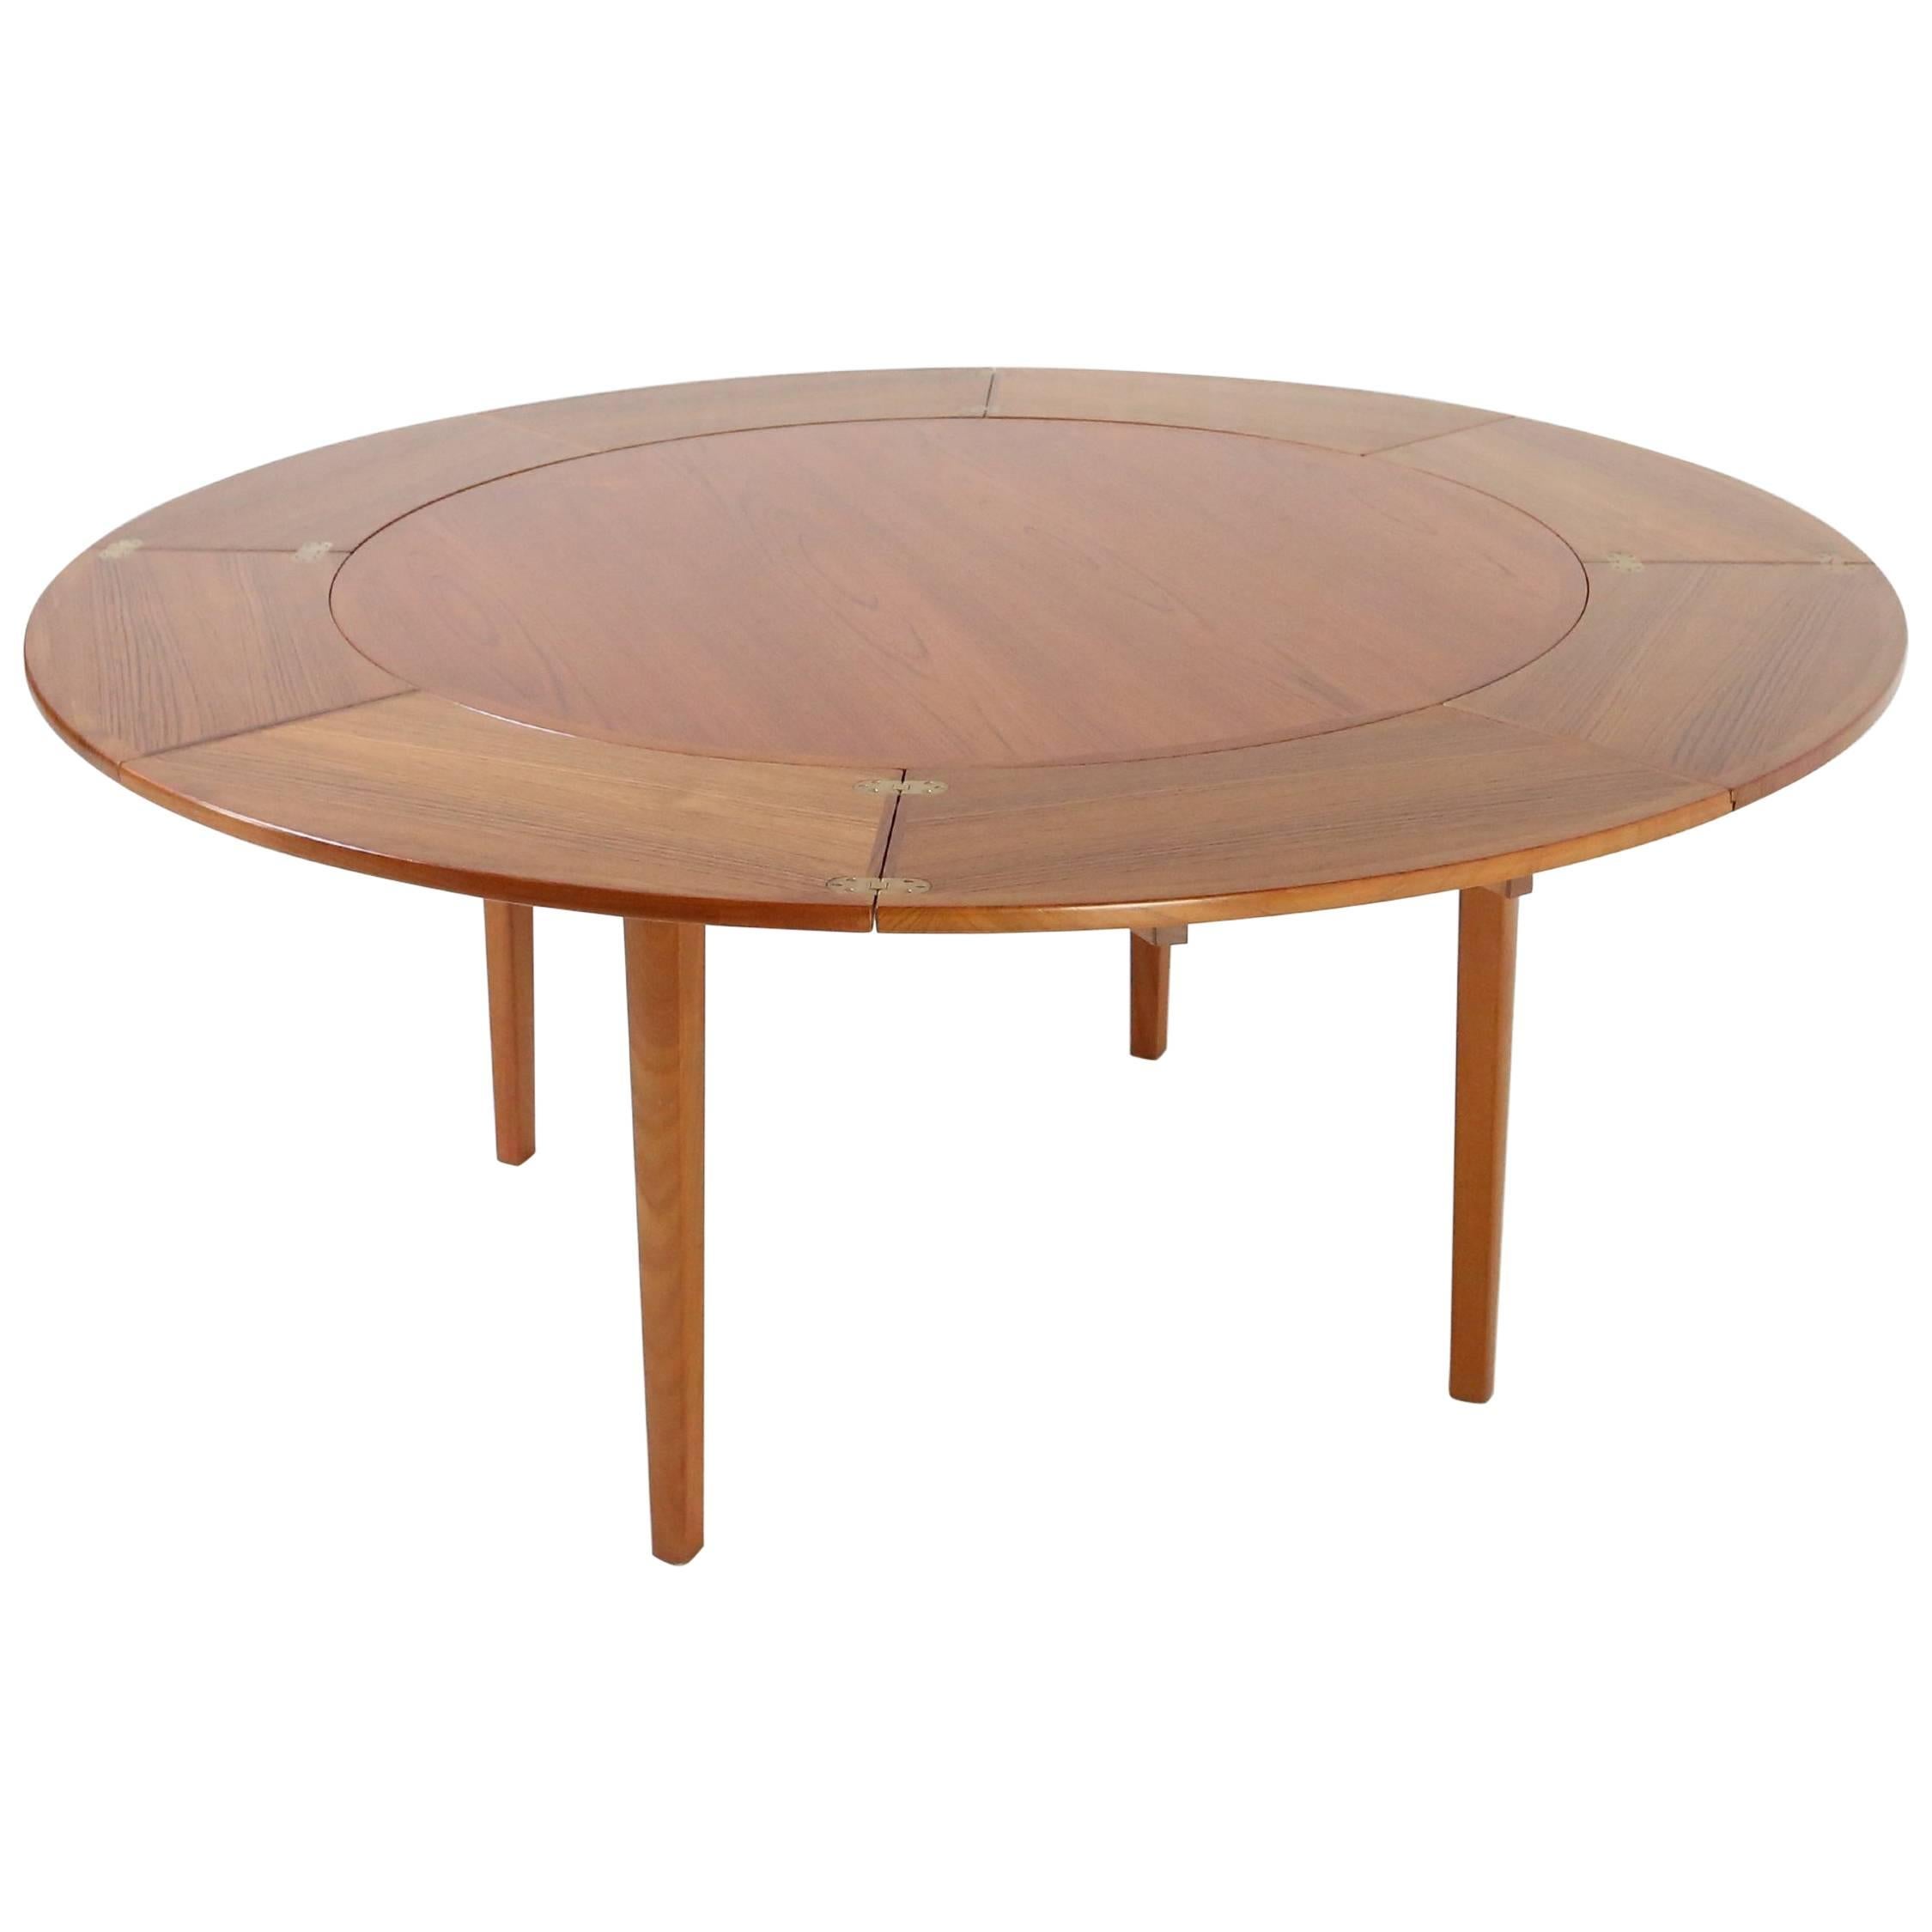 Danish Lotus Flip-Flap Dining Table from Dyrlund, 1960s